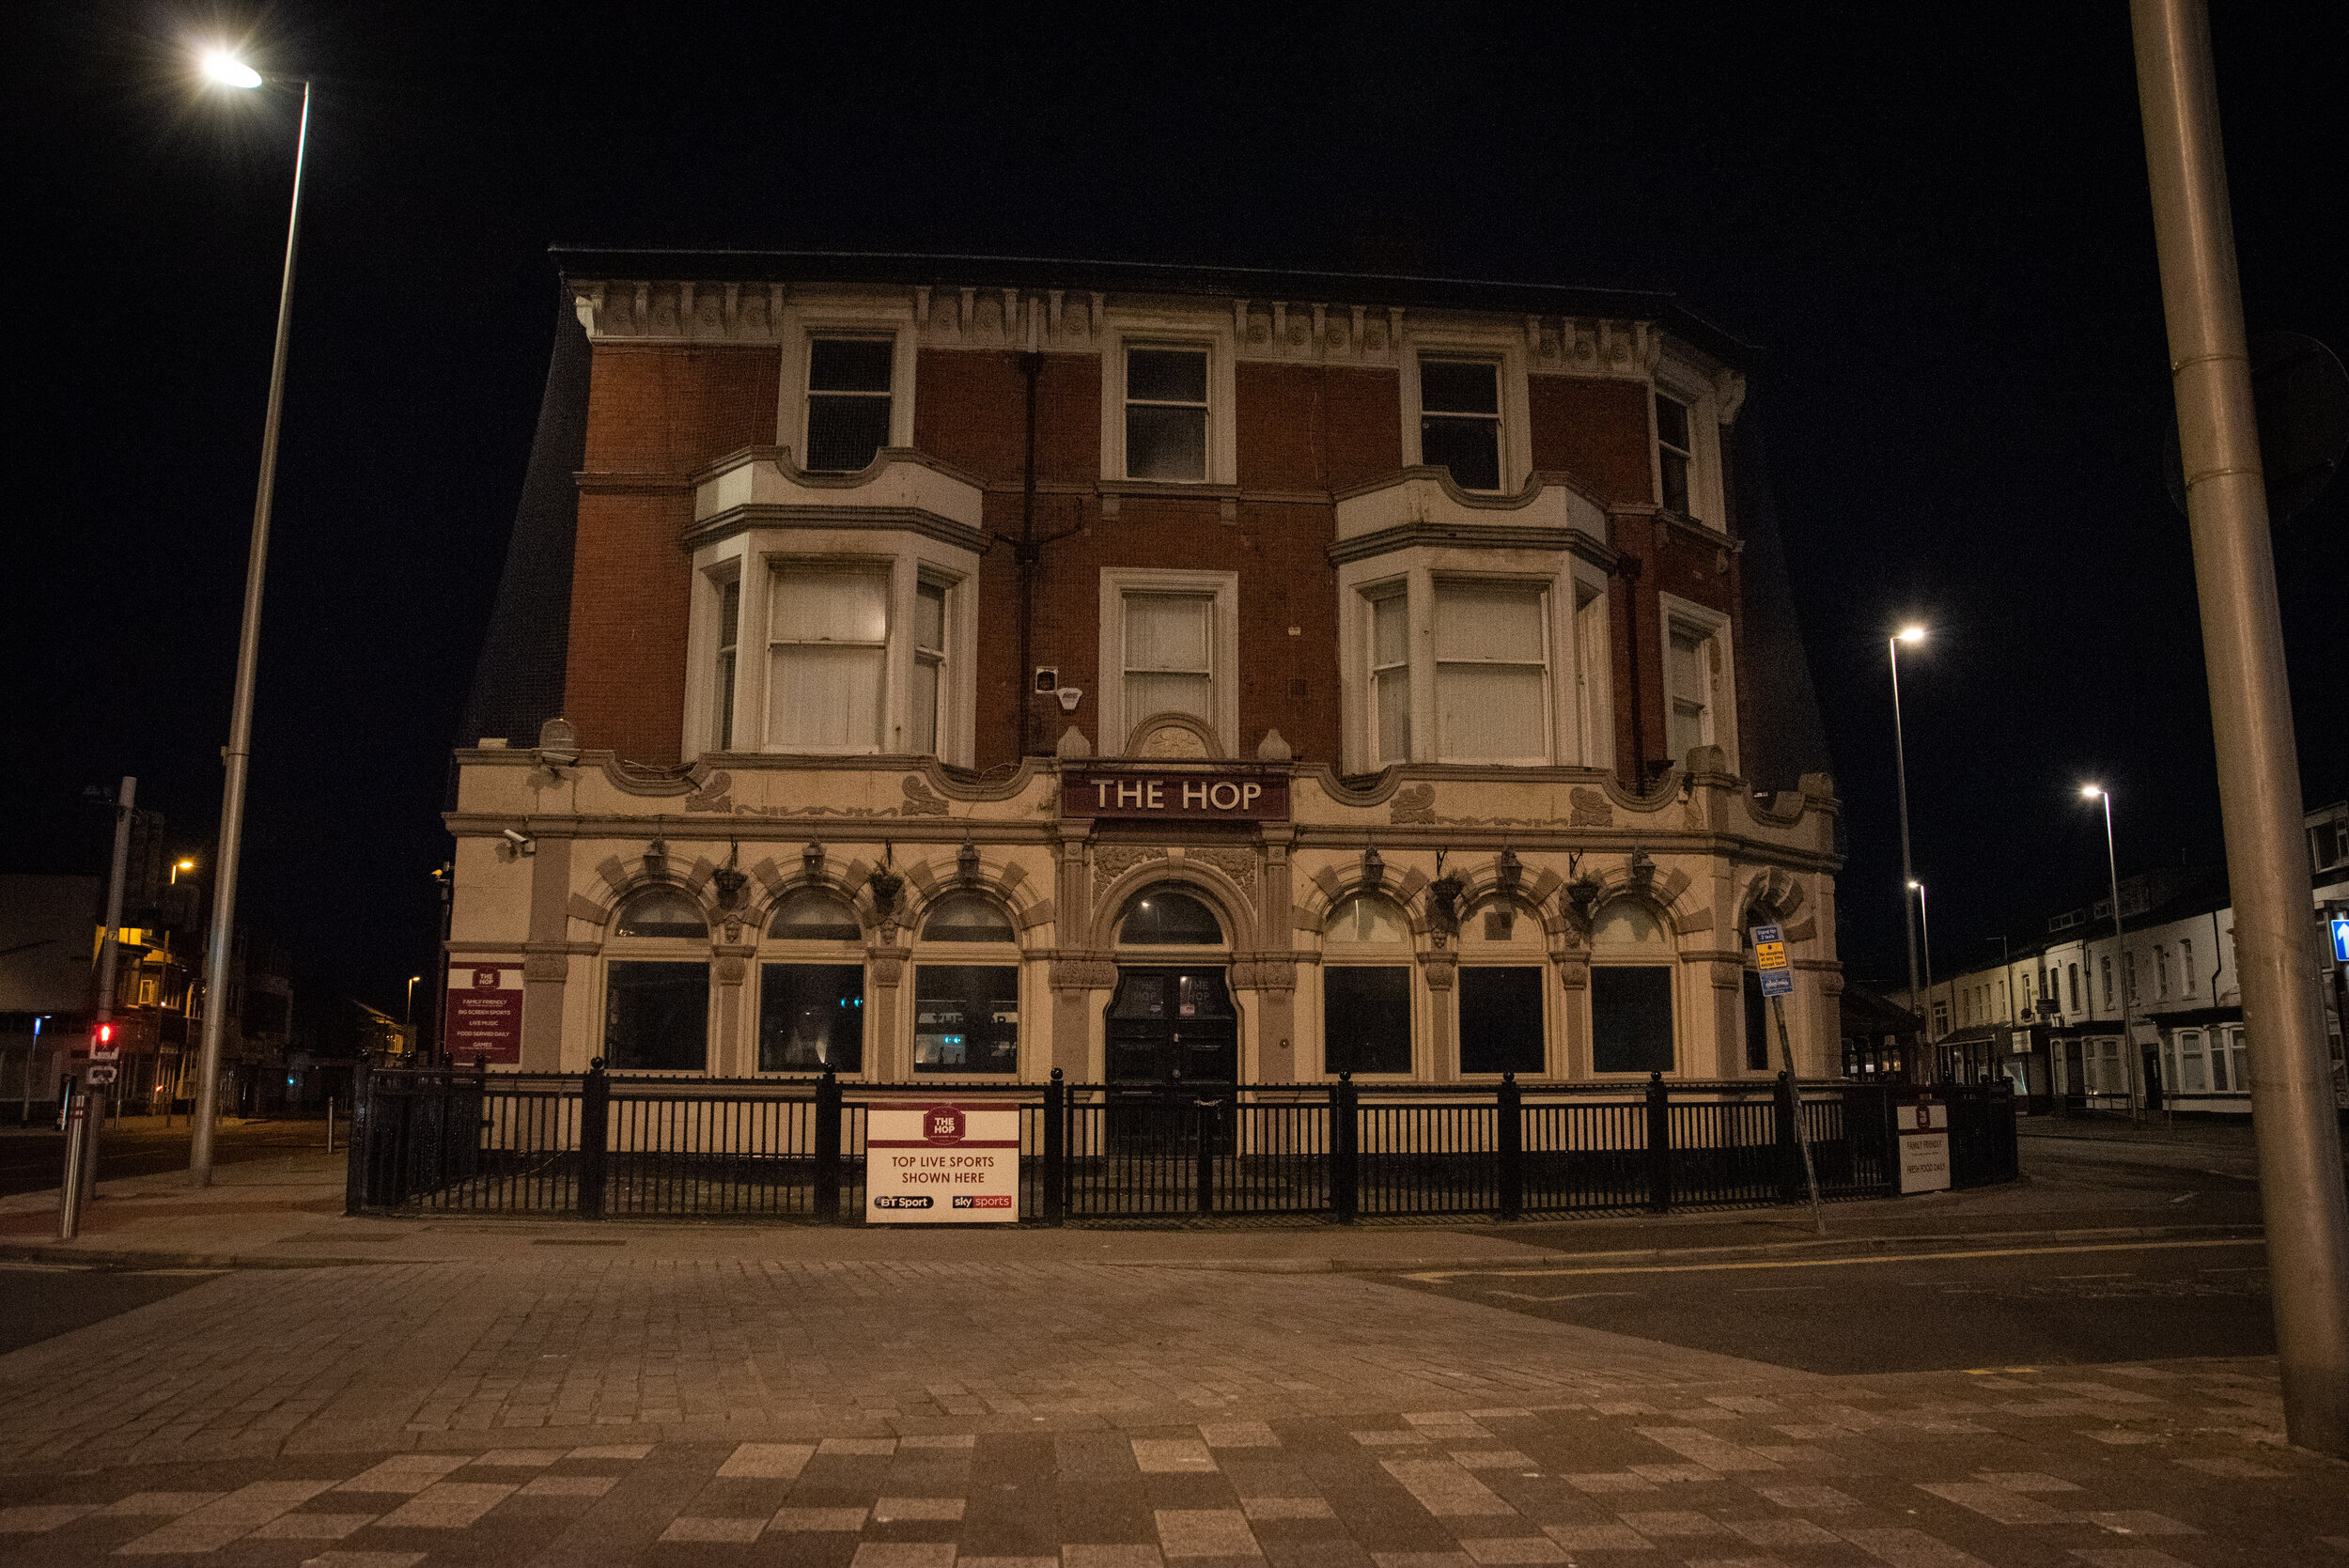 Claire Griffiths April Lockdown 2020 - Pubs in Lockdown and Night Time Blackpool (45).jpg